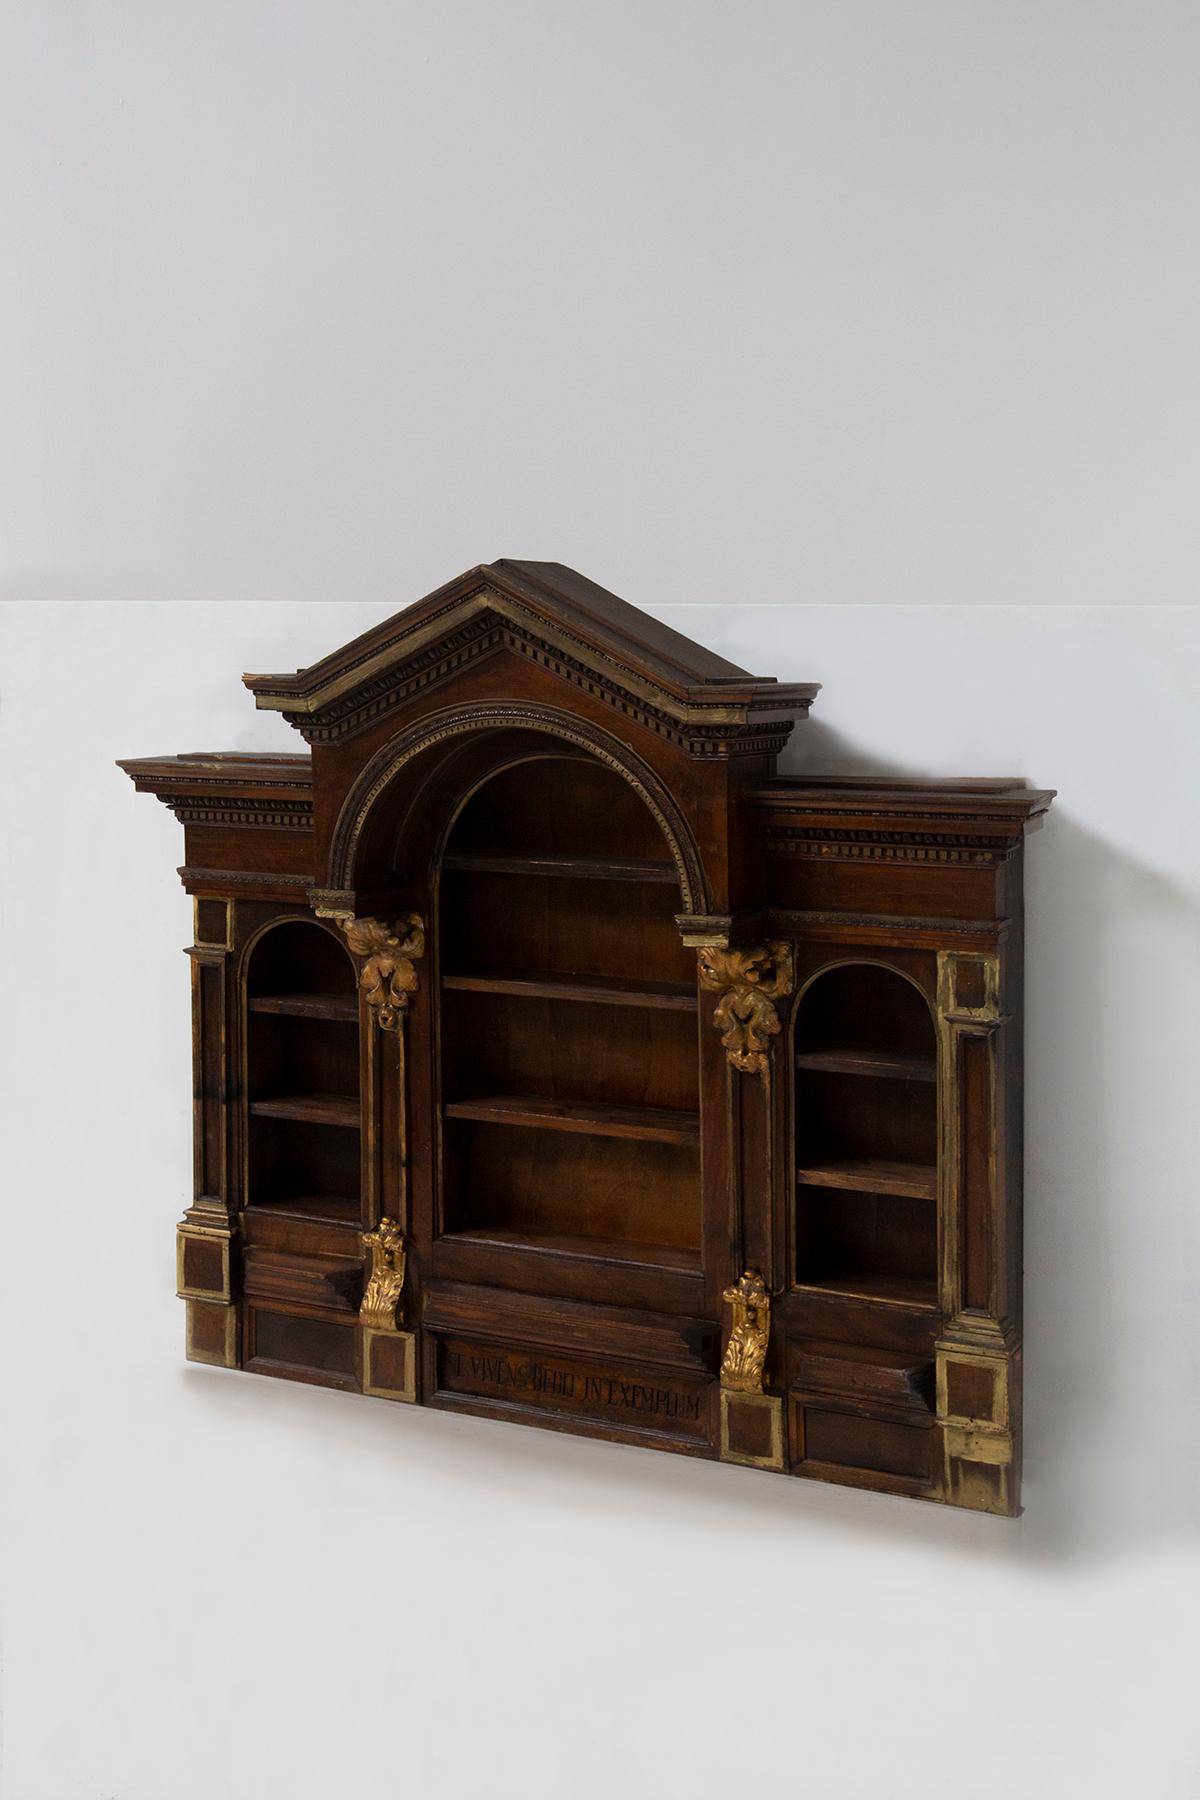 Behold an exquisite testimony to the grandeur and craftsmanship of the Empire style: an elegant hanging cabinet or antique bookcase, masterfully crafted from rich walnut wood and adorned with beautiful gilded inserts that shine like stars in the